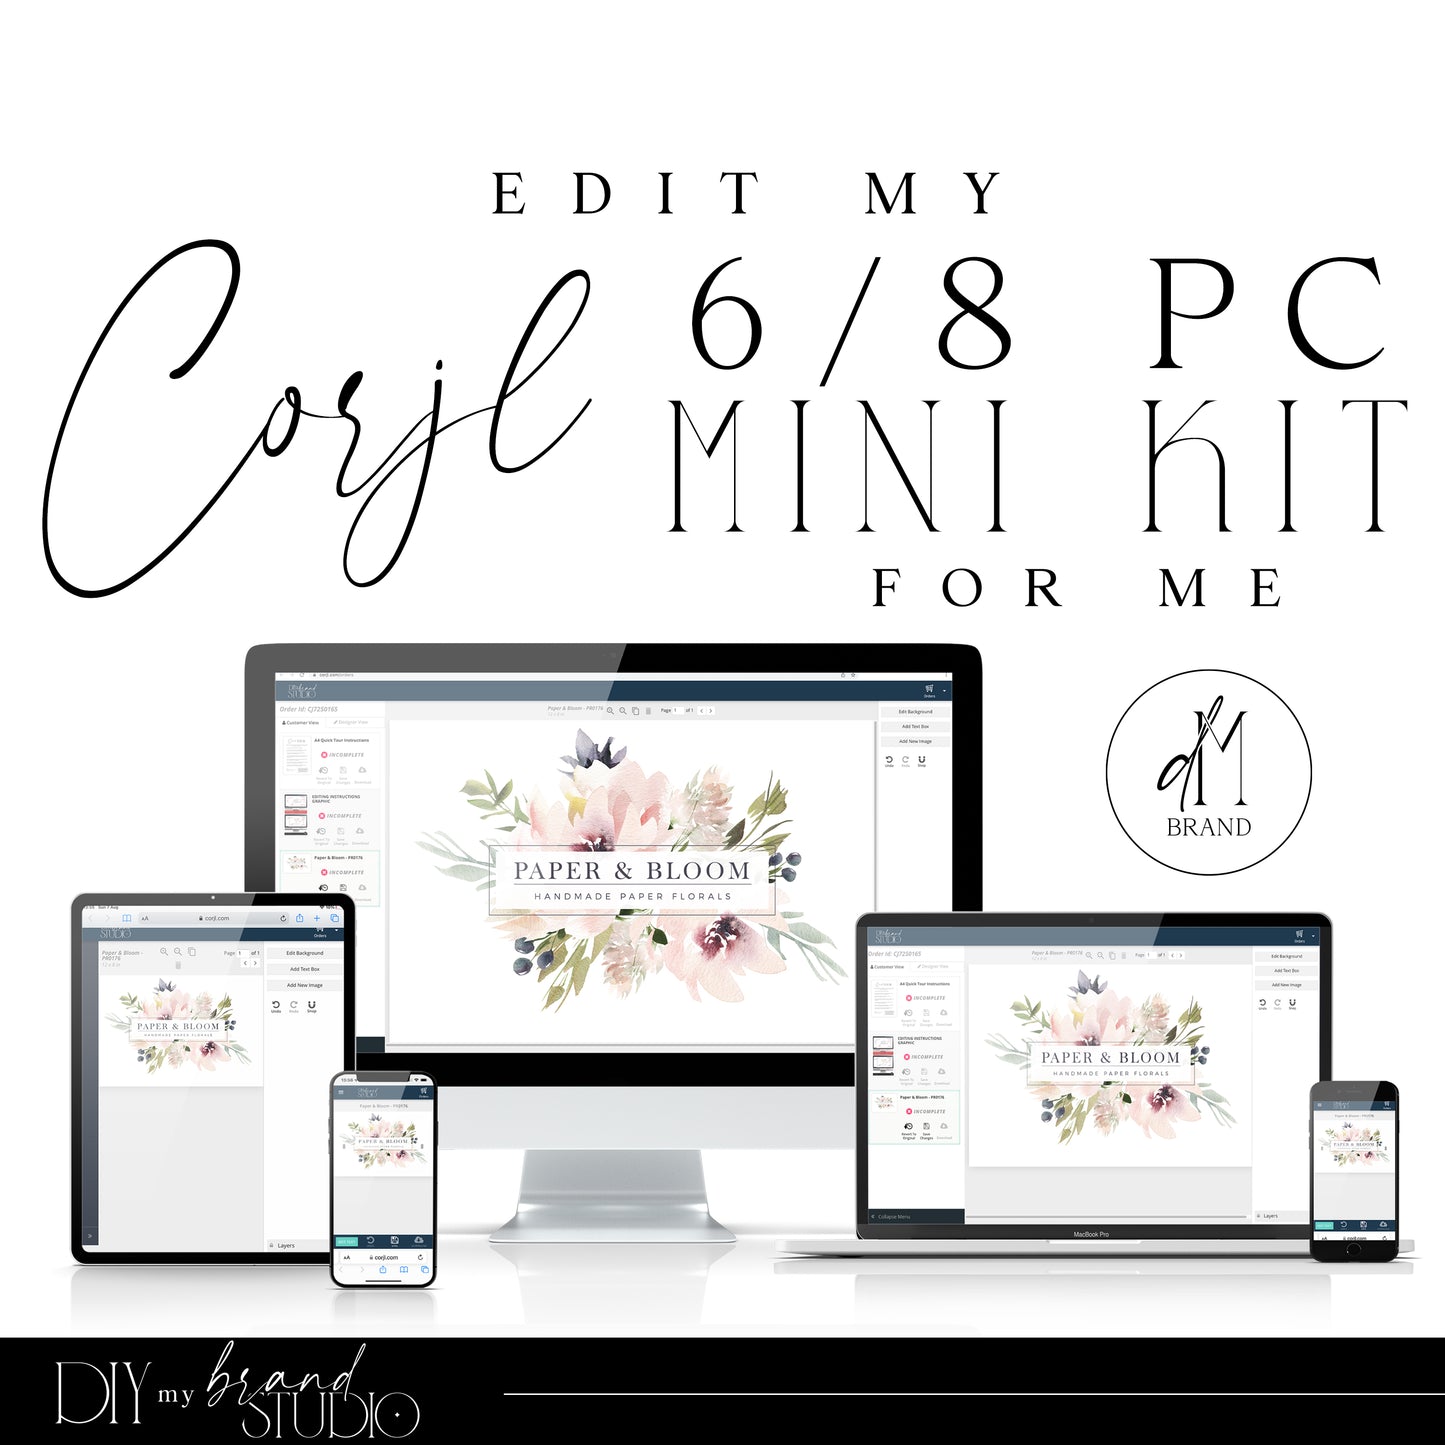 ONLY BUY alongside a 6 or 8pc Maxi Kit from my shop CORJL Editing Service for 6 & 14pc Maxi Kits - Edit for Me Edit my Logo - Minor Edits